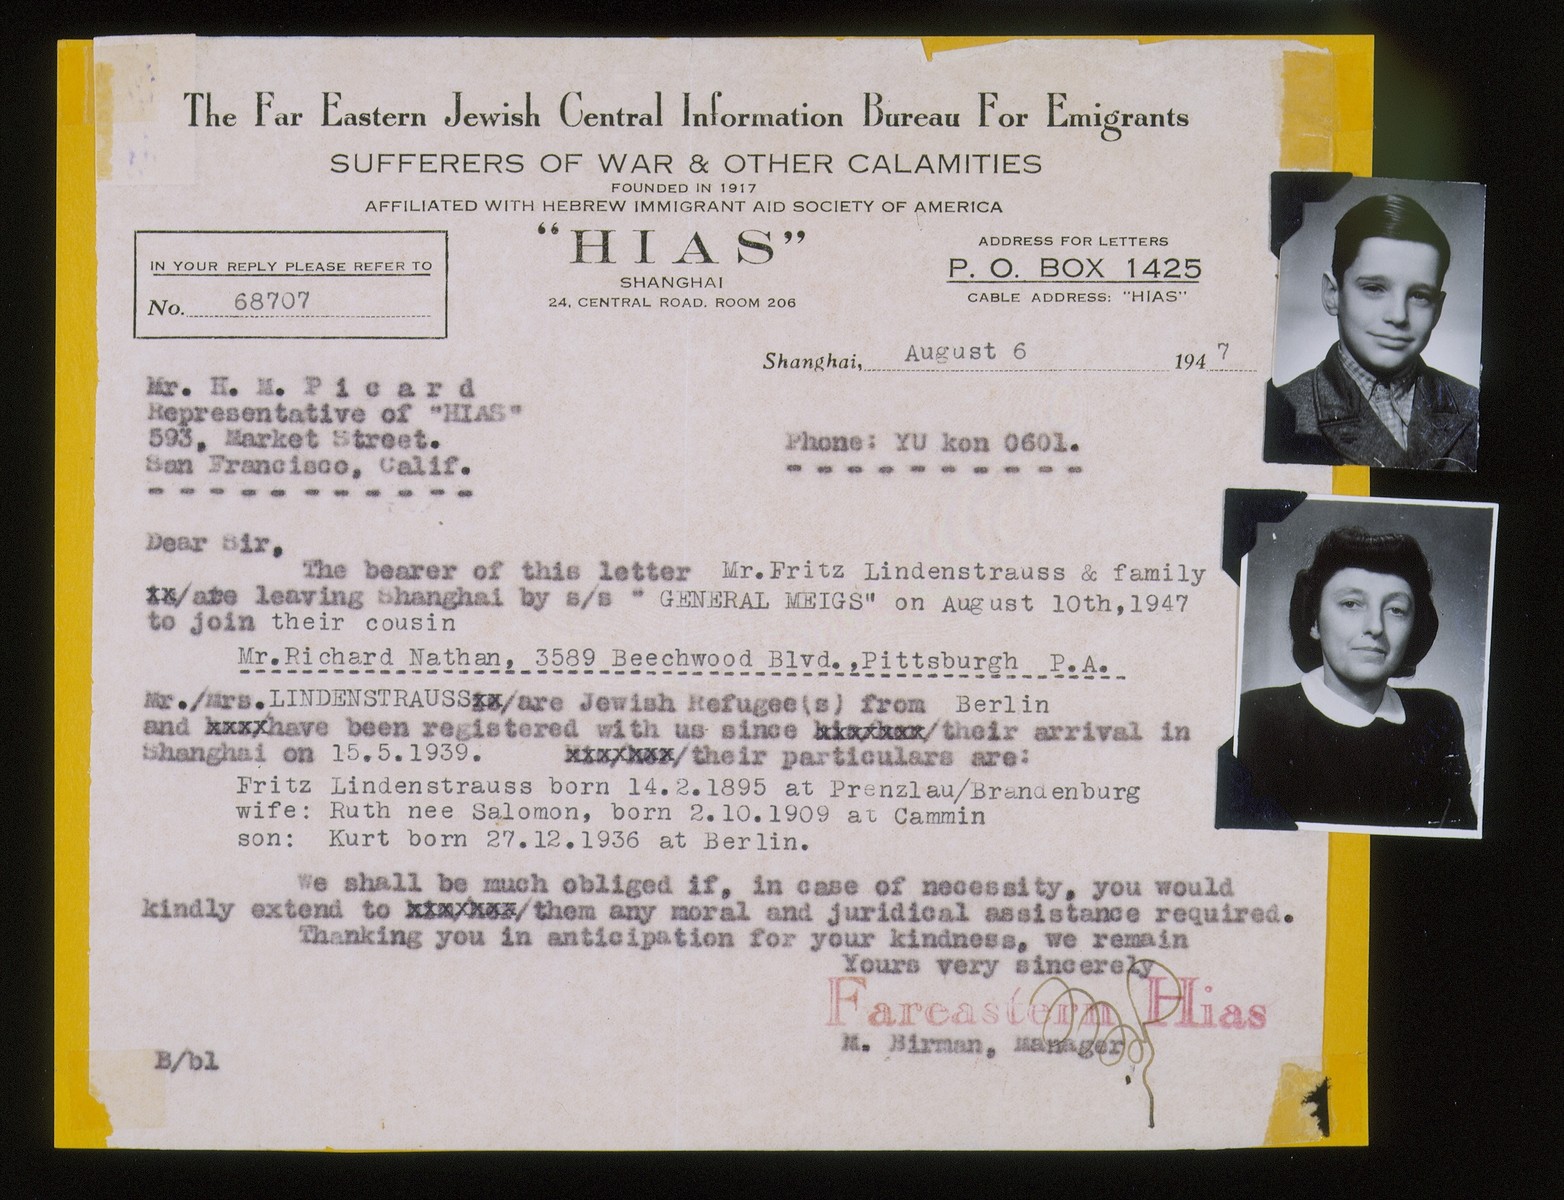 Document issued by The Far Eastern Jewish Central Information Bureau For Emigrants, an affiliate of HIAS, certifying that three members of a Jewish refugee family are leaving Shanghai to join a cousin in PIttsburgh, PA.

The three refugees are Fritz, Ruth, and Kurt Lindenstrauss. The Lindenstrauss' fled from Berlin to Shanghai in 1939.